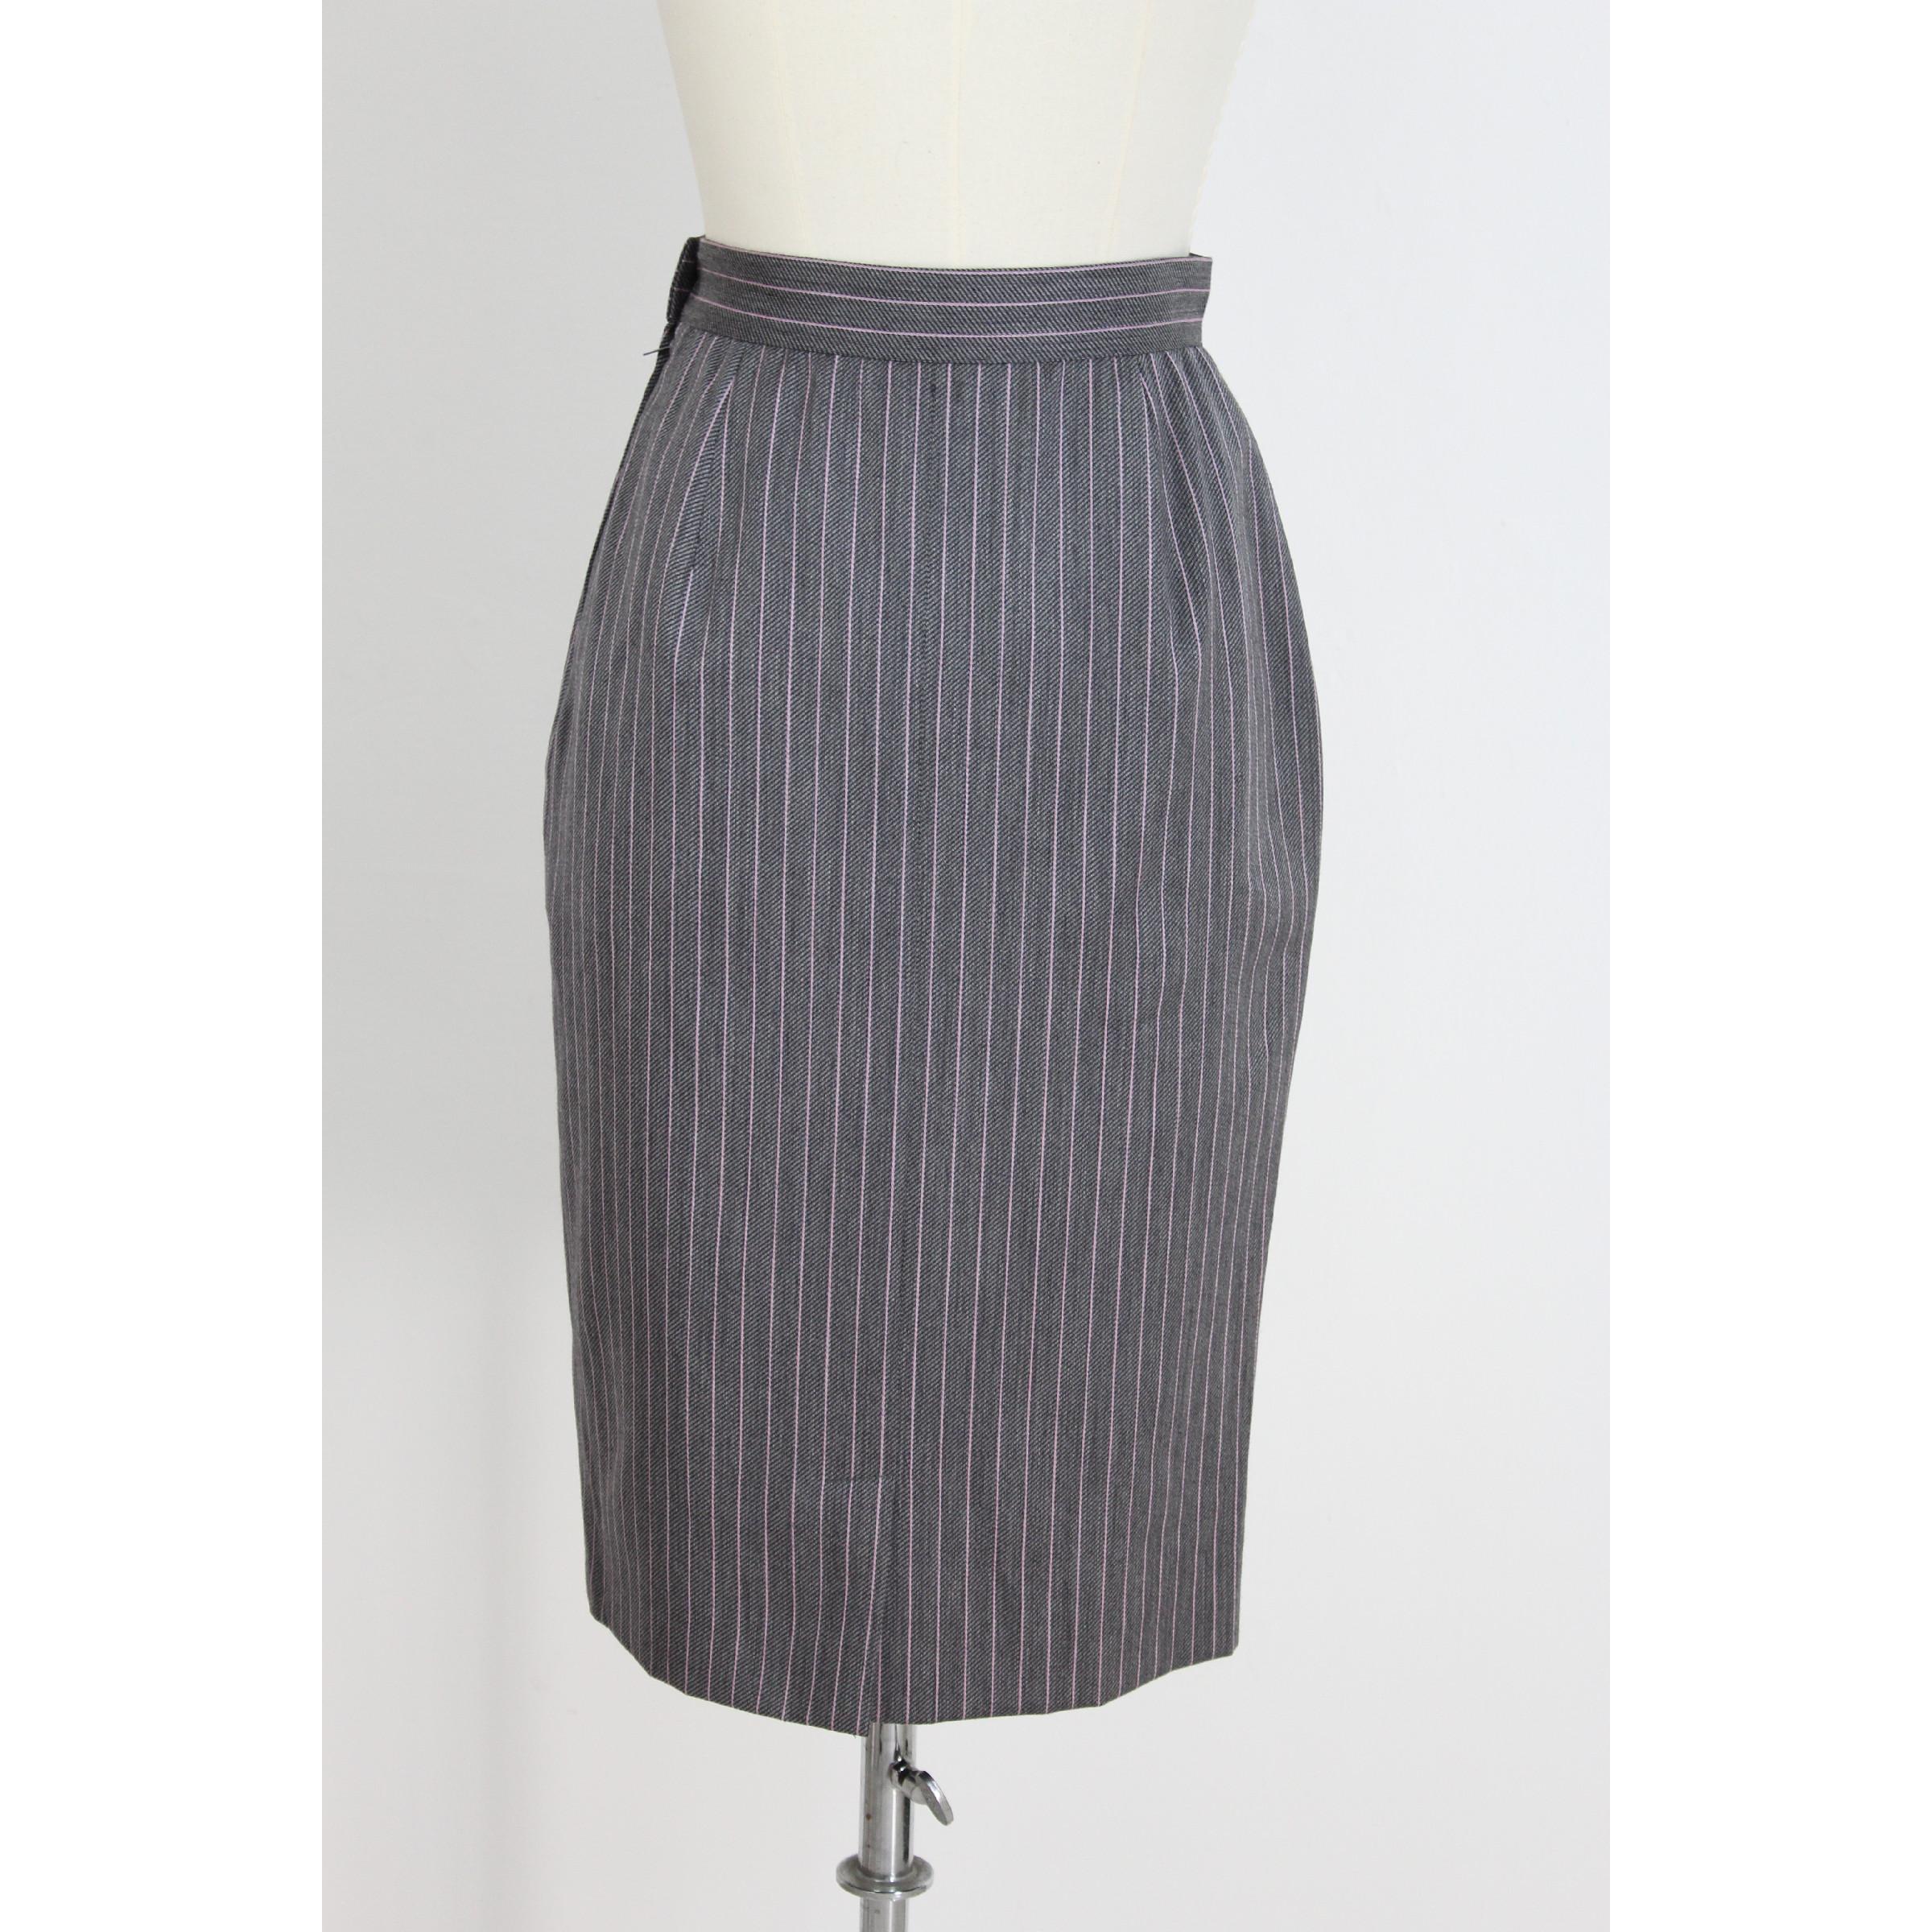 Mila Schon Boutique sheath skirt. Gray color with red pinstripe pattern. Side closure with zip and button. Internally it is lined. New without label. Made in Italy.

Size 42 It 8 US 10 UK

Waist skirt: 35 cm
Length of the skirt: 68 cm
